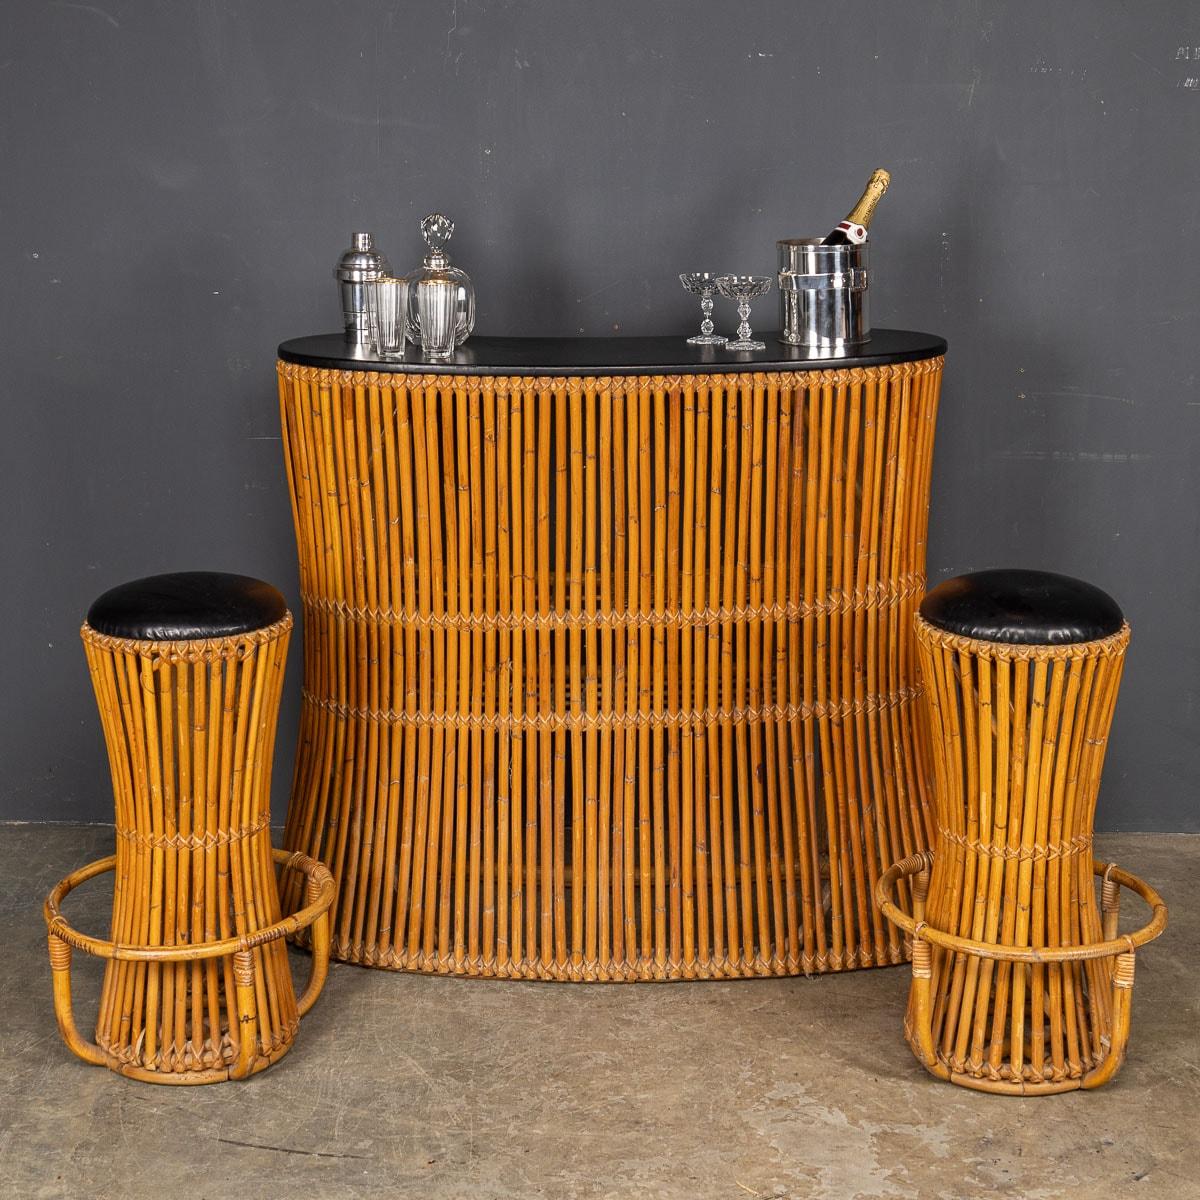 An exquisite vintage cocktail bar and accompanying stools, adorned with bamboo finishes, hail from the stylish era of the mid-1960s. The bar, with its distinctive kidney shape, showcases a sleek black countertop and stool seats, while the interior